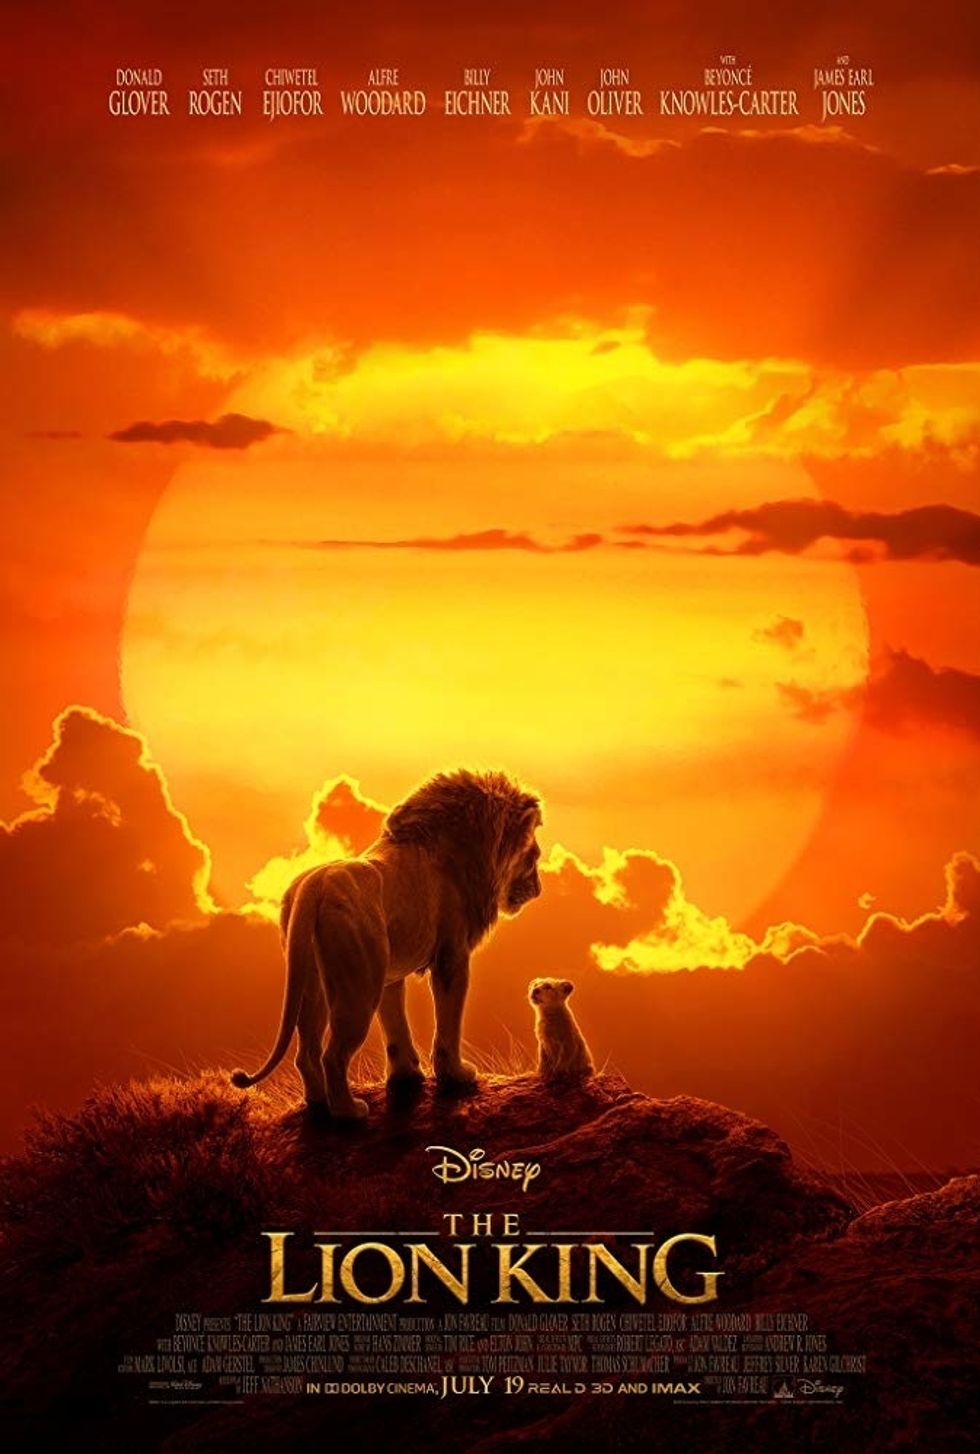 "The Lion King" — AKA The Best Movie I've Ever Seen